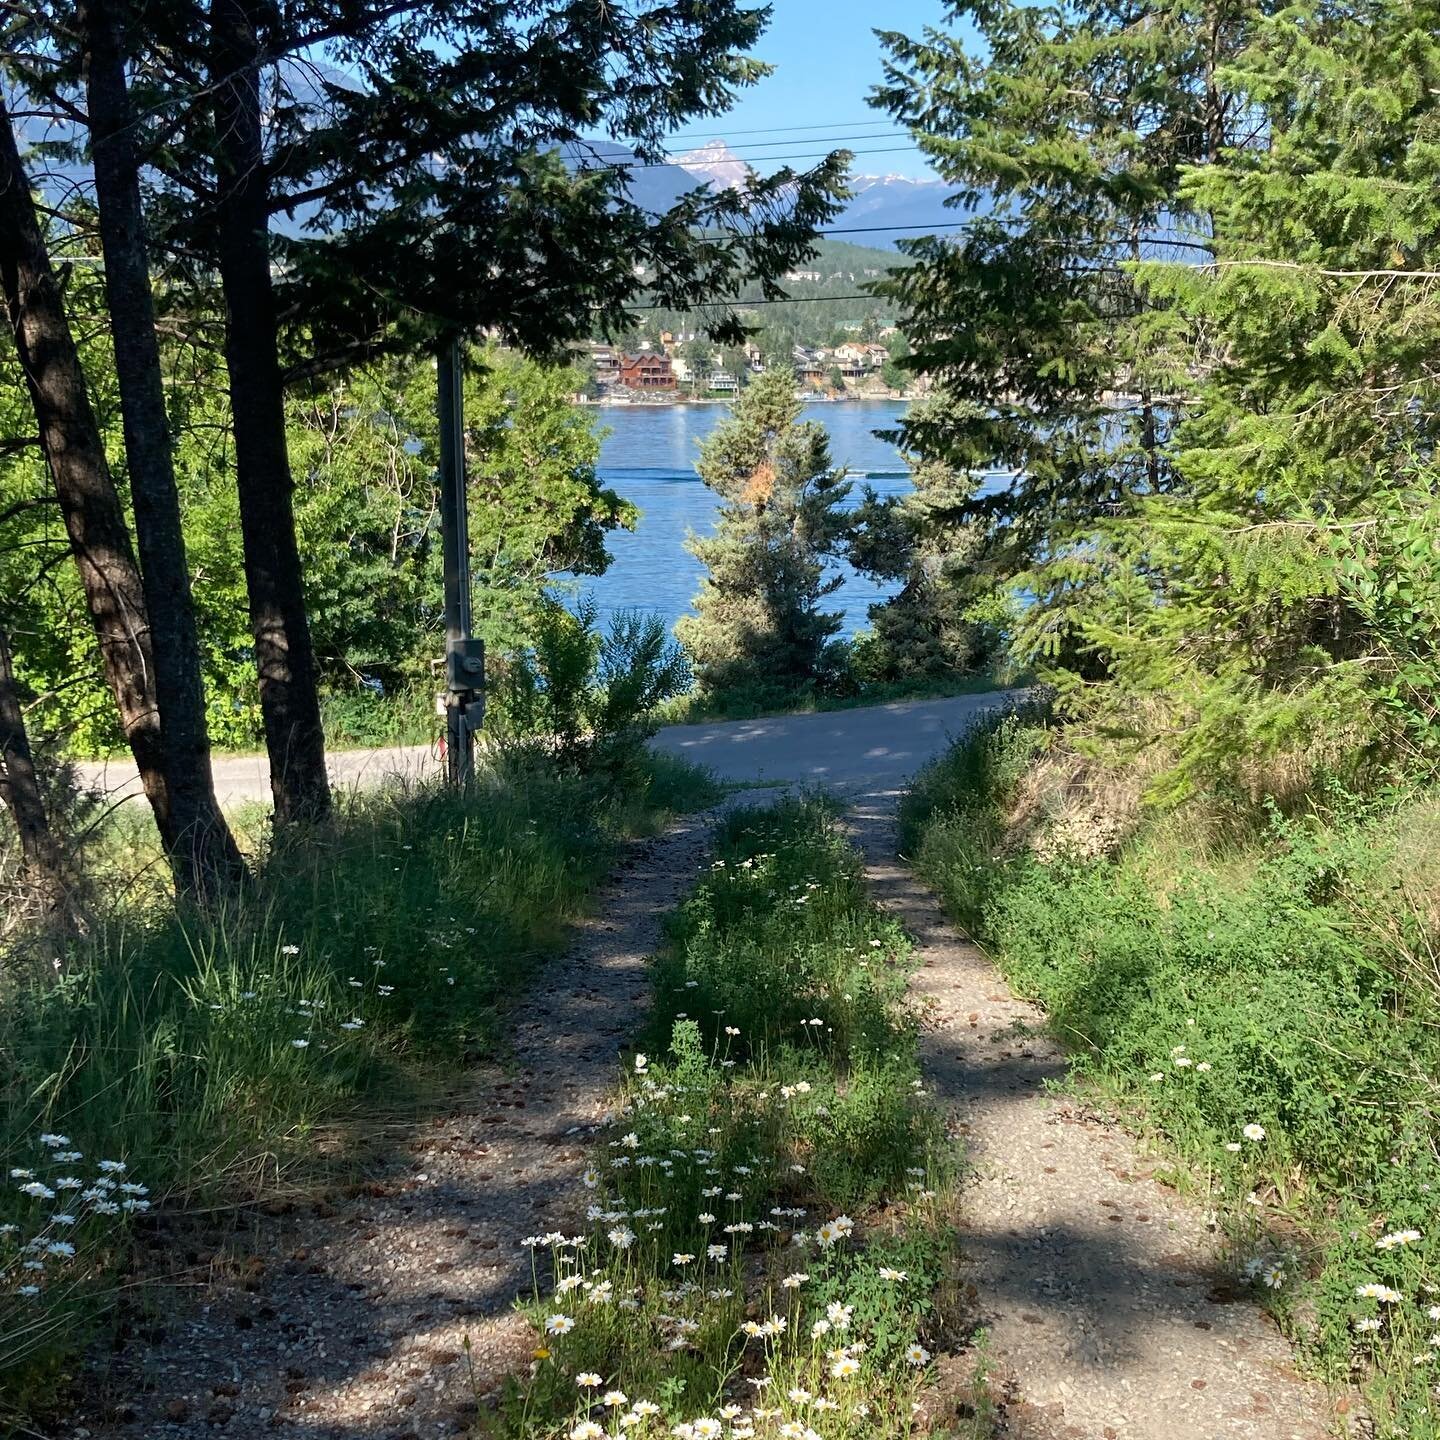 I had good intentions of getting out for my walk a little earlier today, because it&rsquo;s going to be ridiculously hot again. 🥵
.
Got sidetracked by the driveway daisies&mdash;and the lake and that sky. Grateful to spend time in this beautiful pla